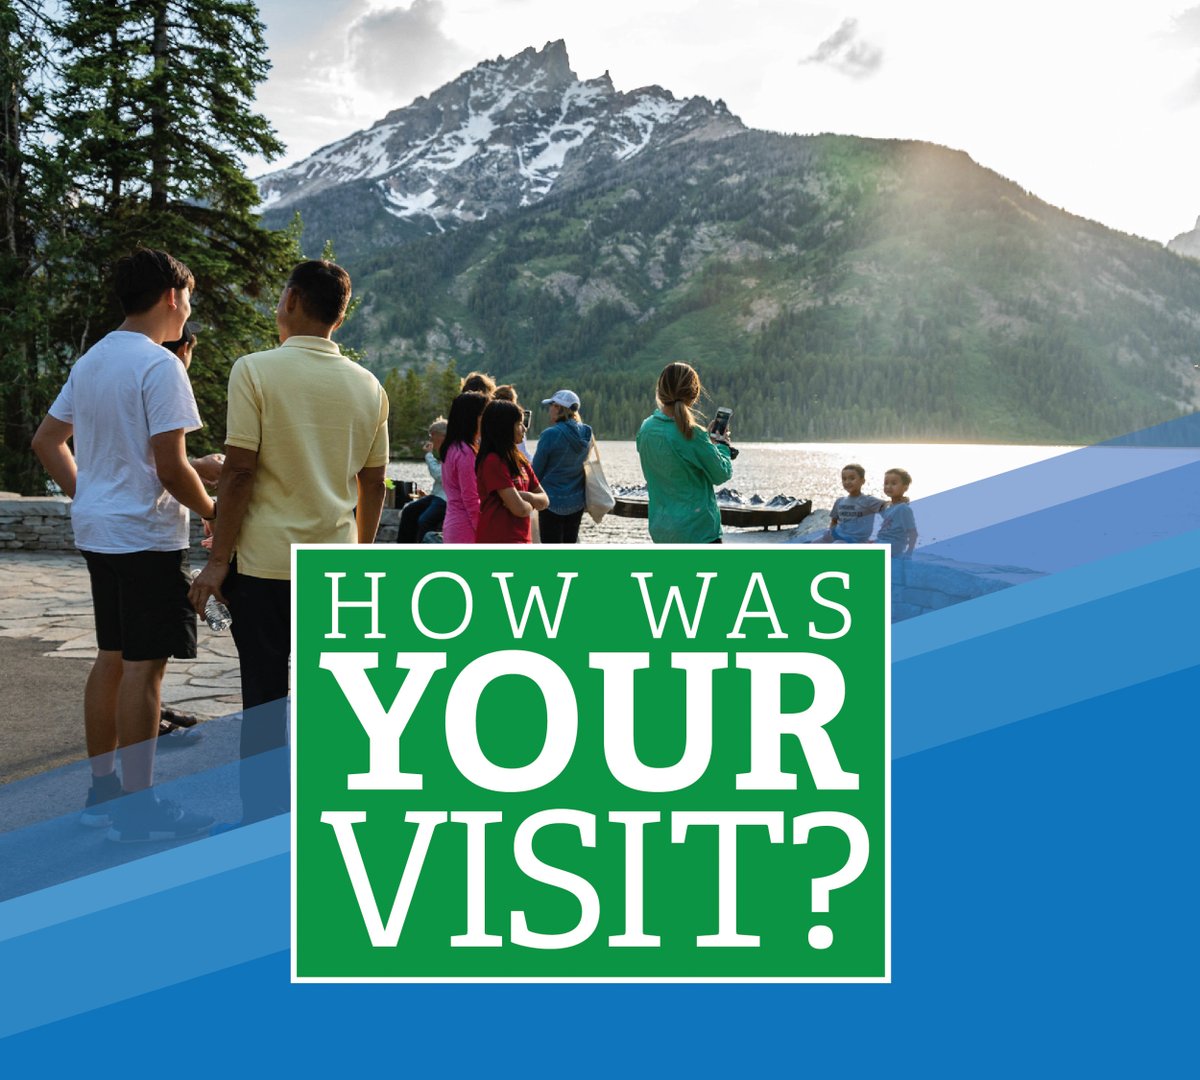 Grand Teton is seeking public input through Oct 10, 2023, on how visitors use, experience & access the park. The park will use the feedback to better understand public perceptions as it continuously looks to improve visitor experiences. Continue reading at go.nps.gov/mmbulx